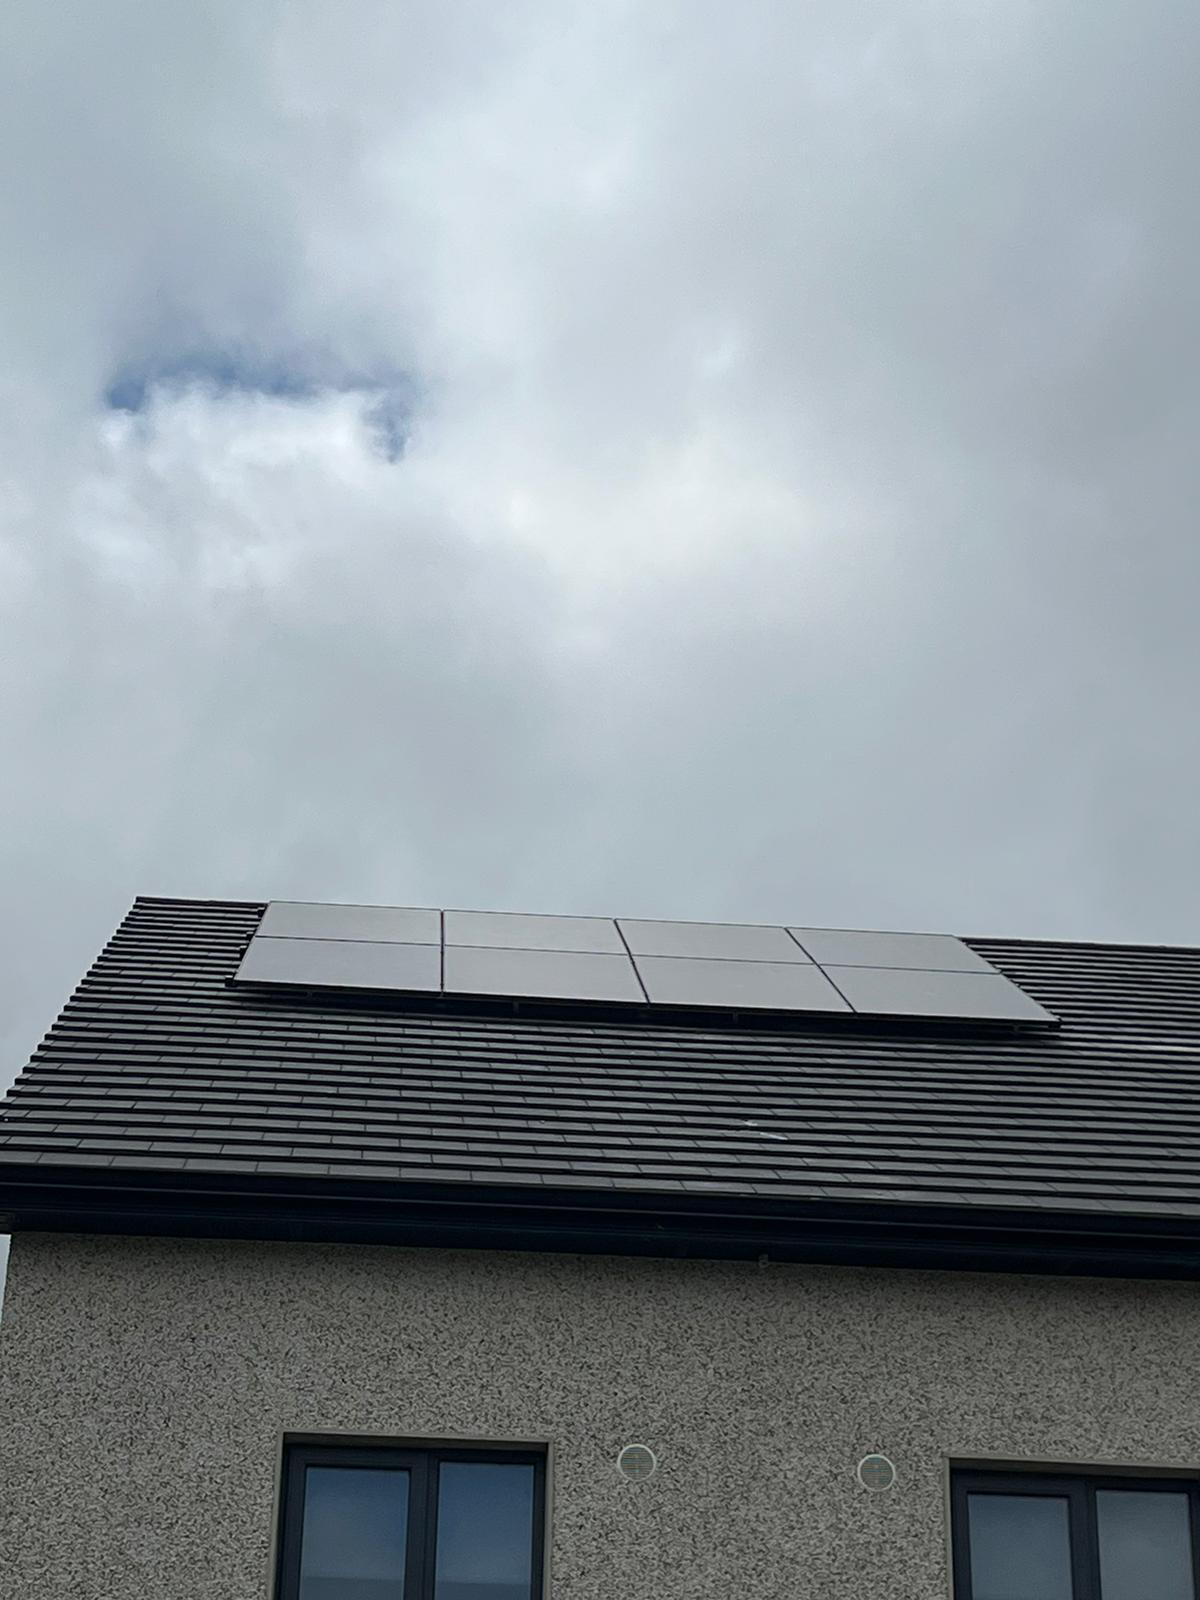 Air Source Heat Pumps
Solar Photovoltaic Panels
Solar Thermal panels
High Efficiency Gas Boilers
Und Home Energy Assist Dublin (01) 961 4609